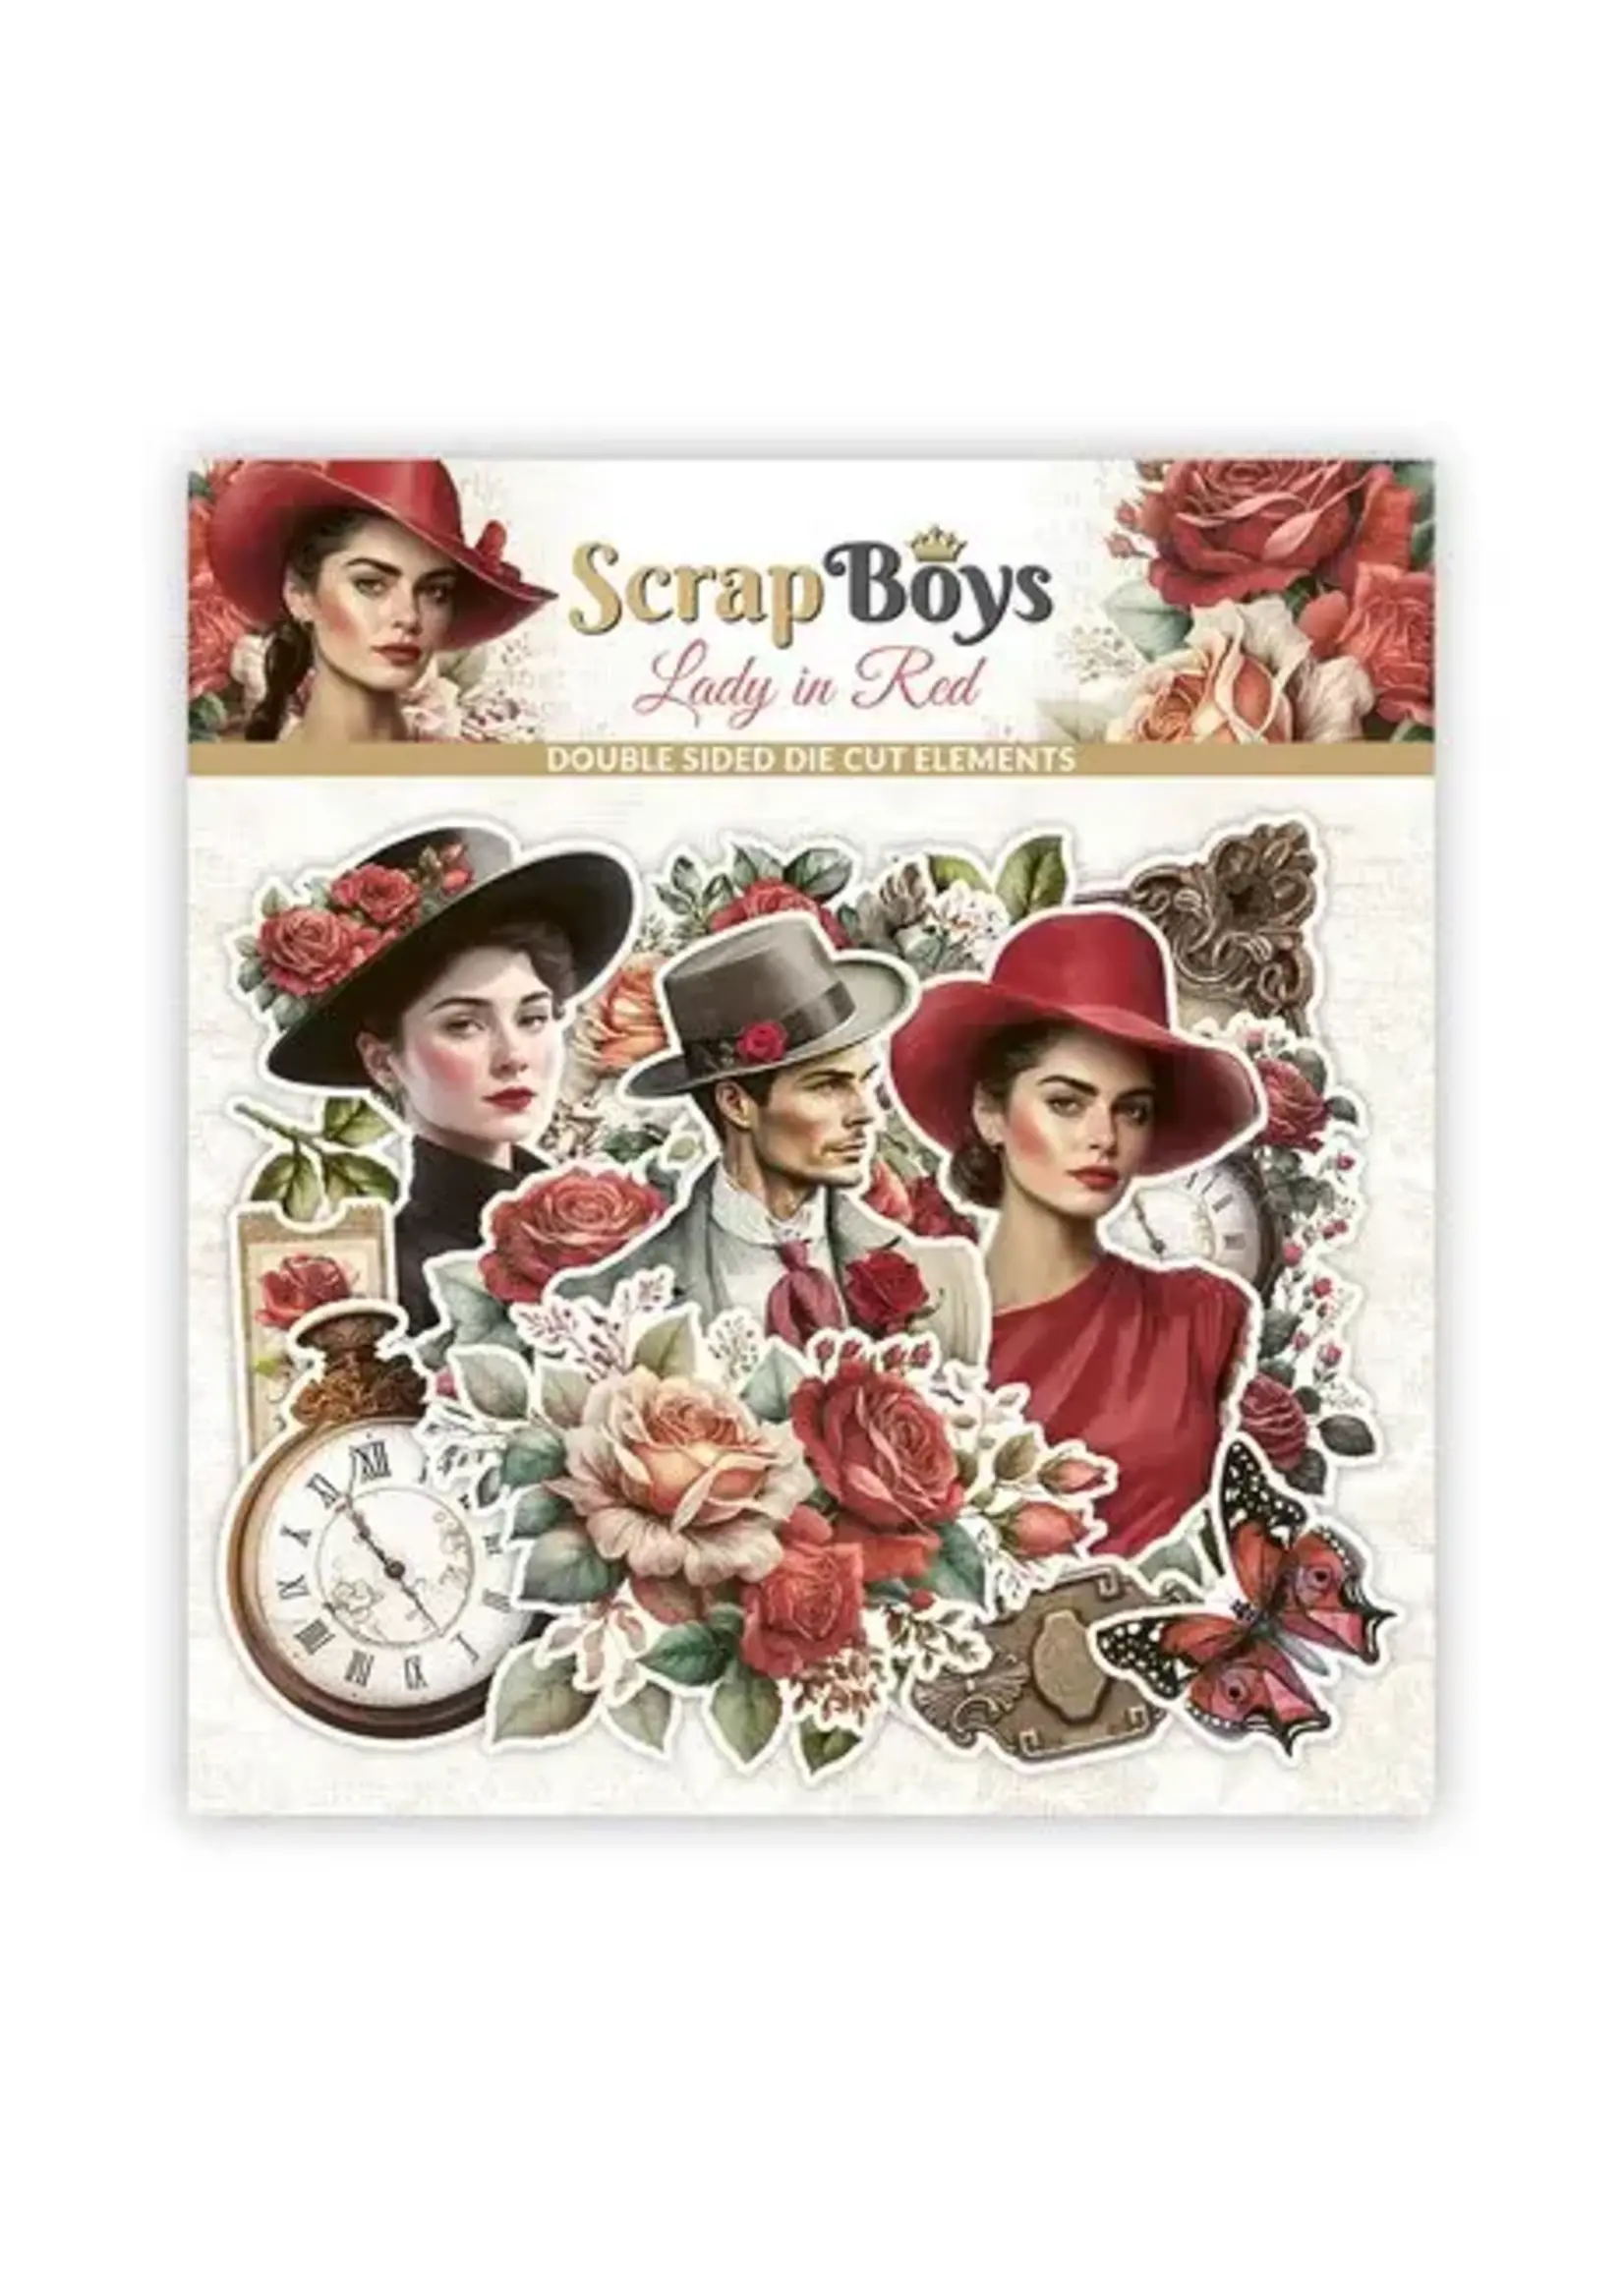 Scrapboys Lady in Red Double Sided Die Cut Elements 51 pcs (SB-LARE-12)